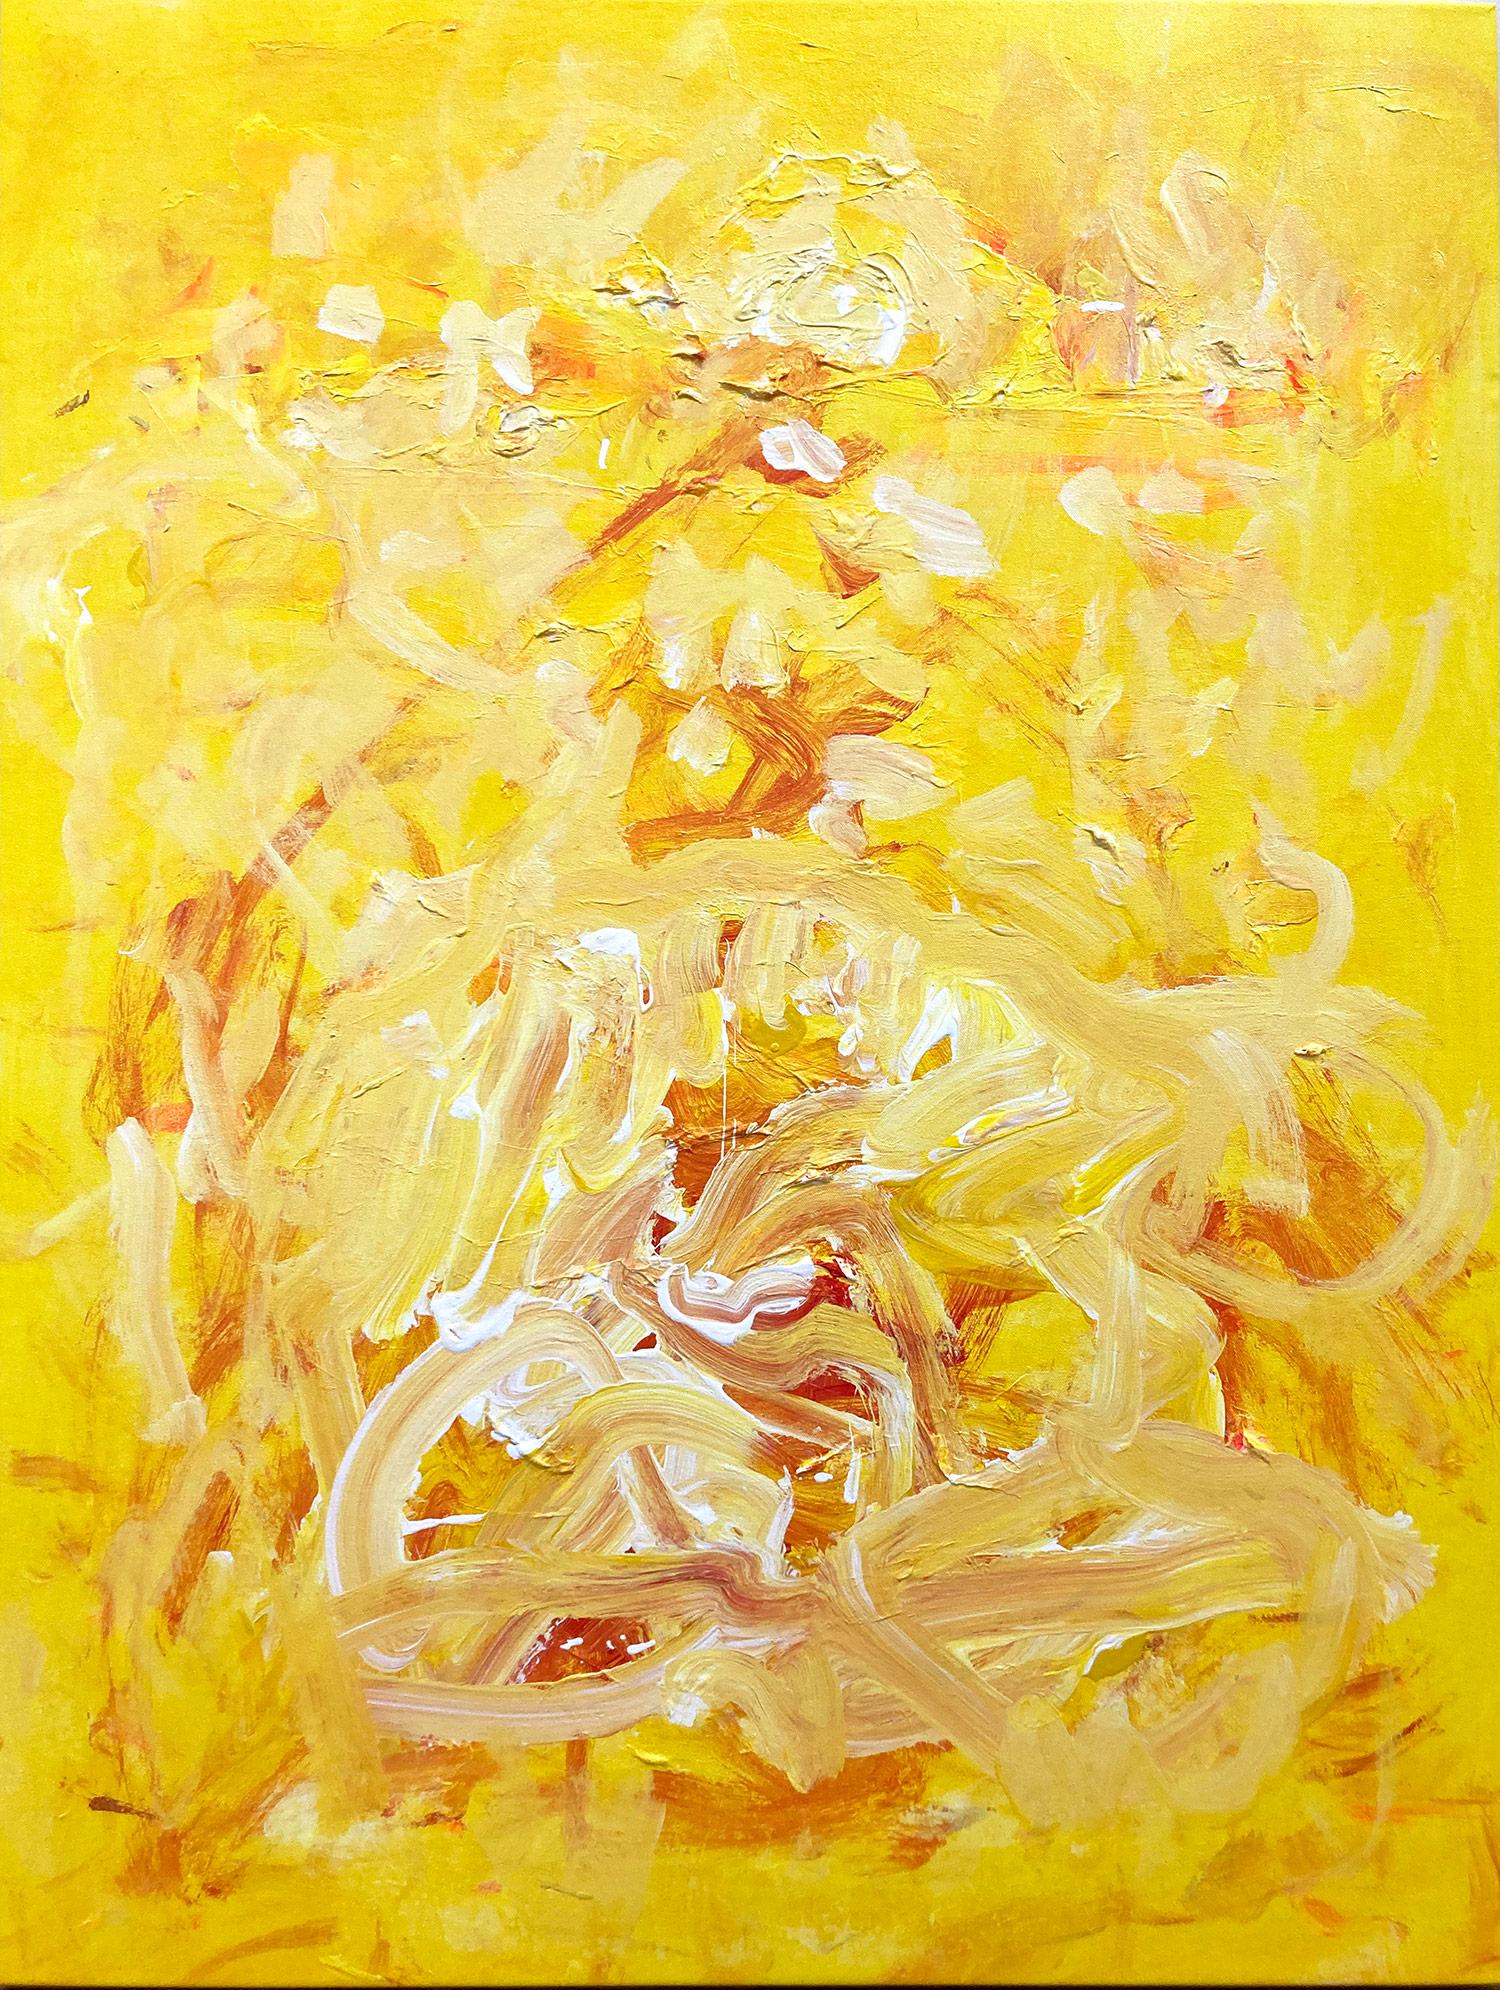 Robert Gregory Phillips Abstract Painting - "Nativity In Yellow" Contemporary Gradient Abstract Acrylic Painting on Canvas